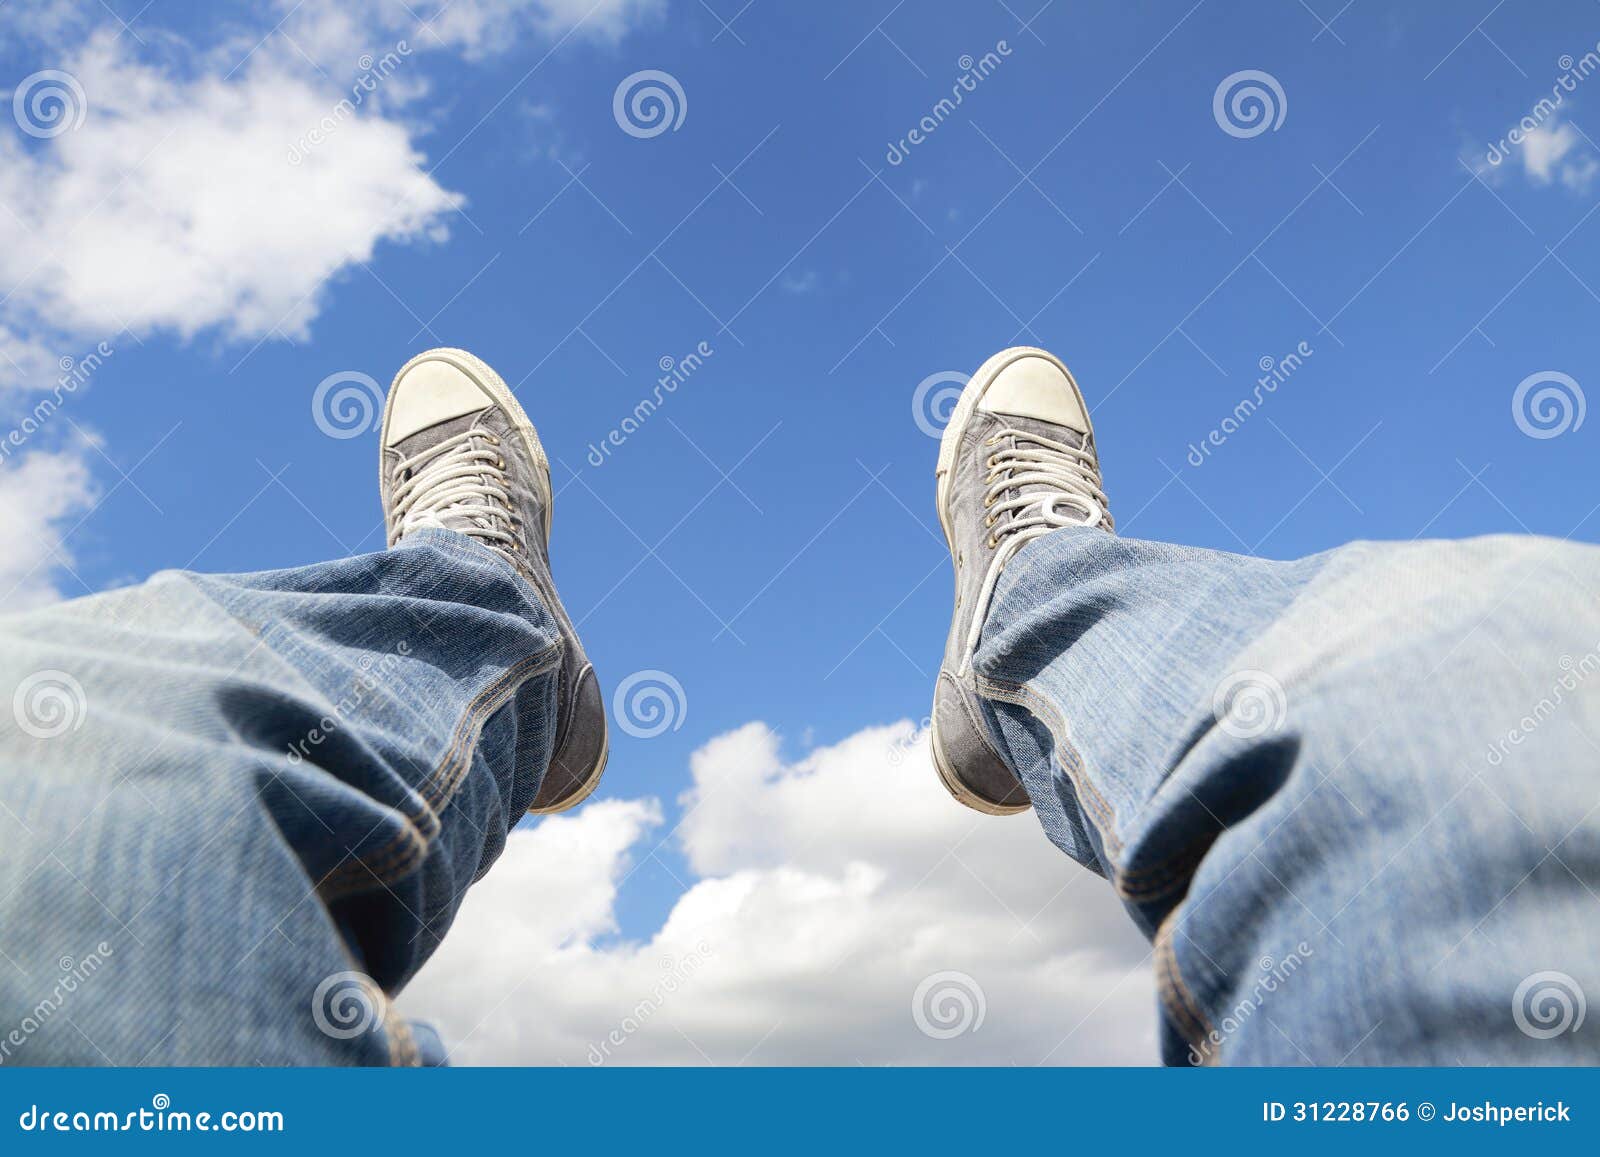 Sitting in the sky stock photo. Image of beauty, climate - 31228766